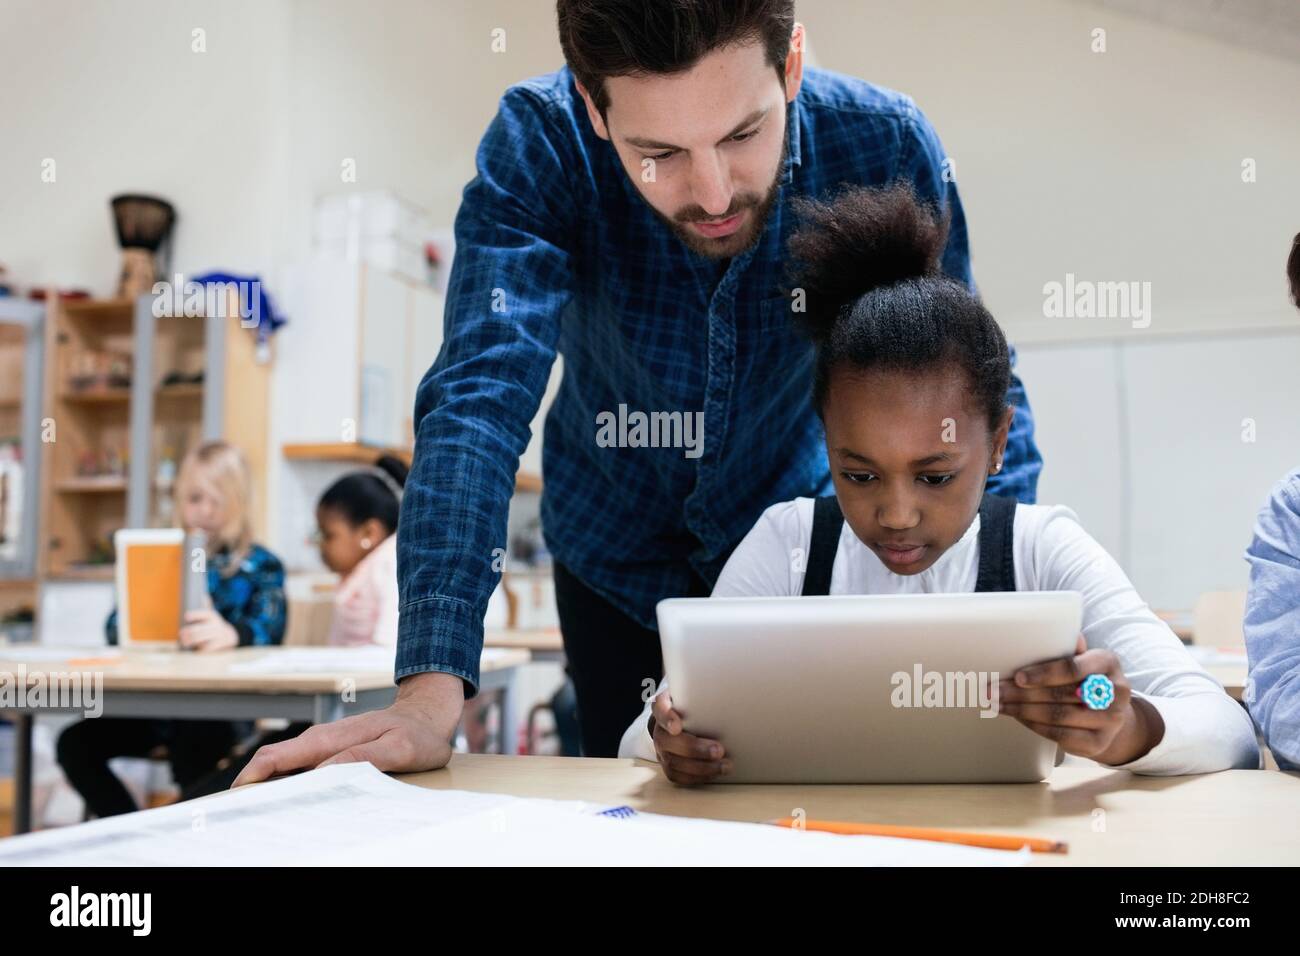 Teacher looking at girl using digital tablet in classroom Stock Photo